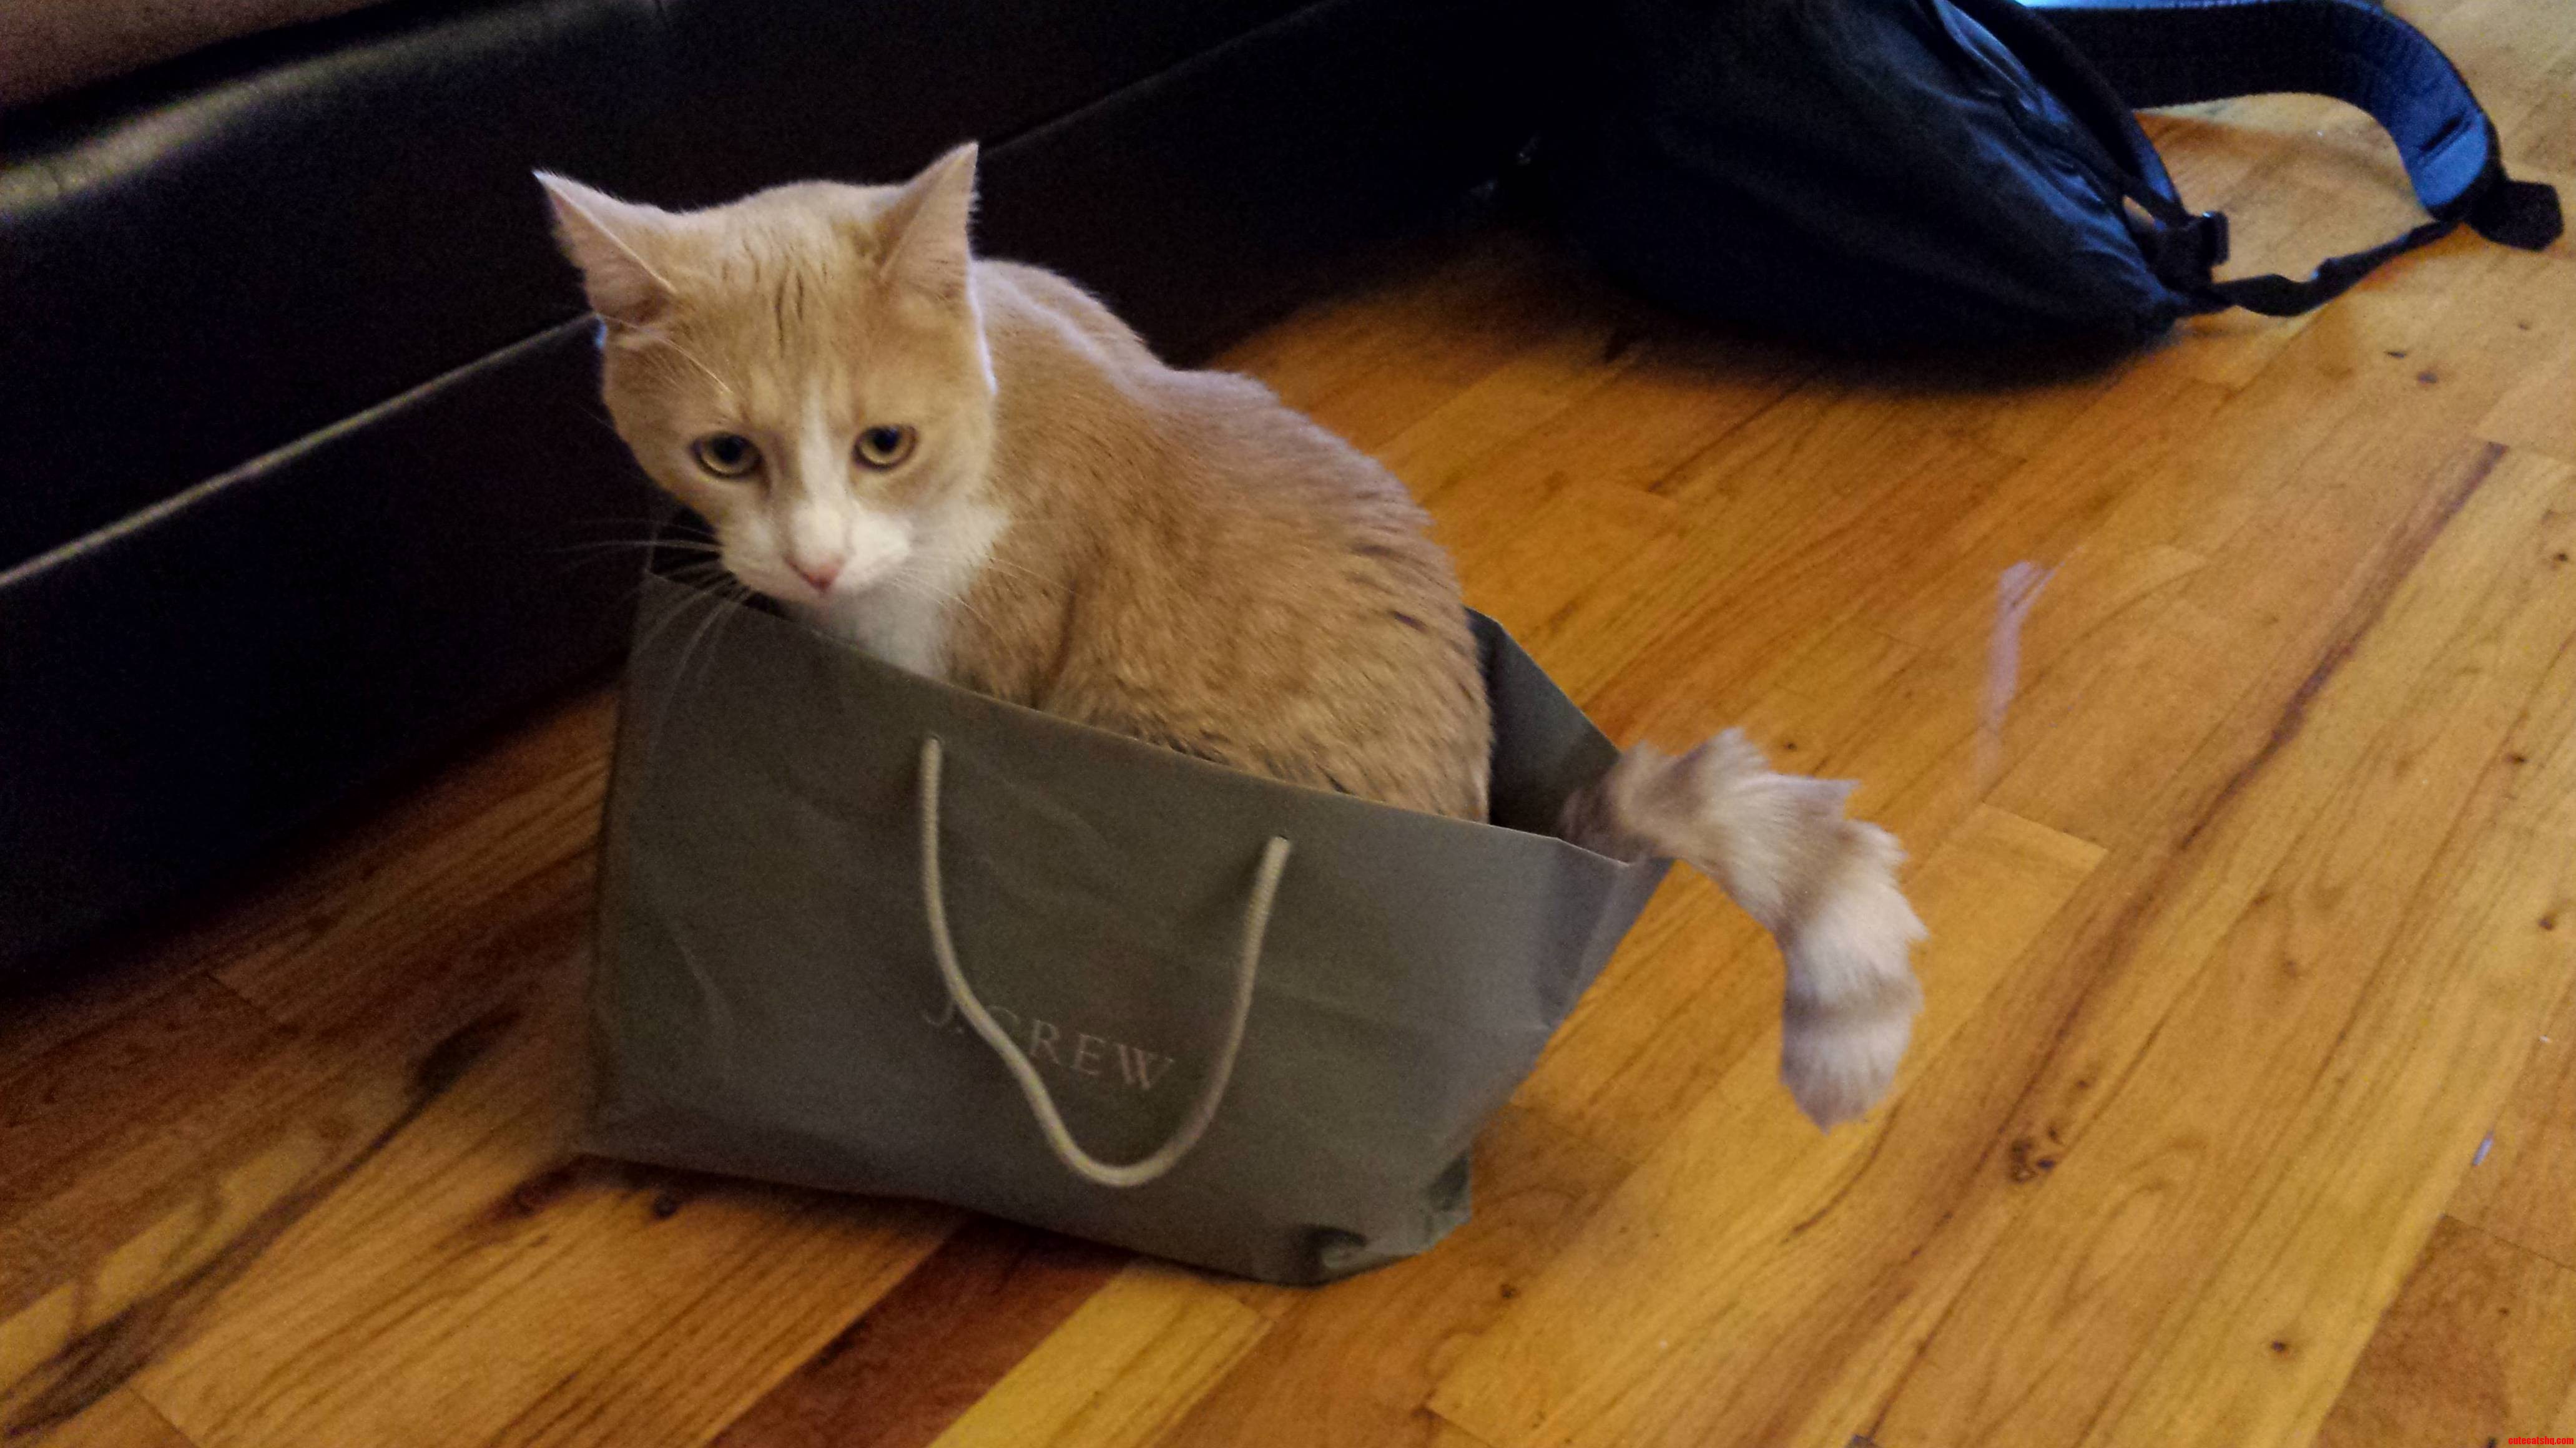 My cat son Sammy exploring the option of being toted around